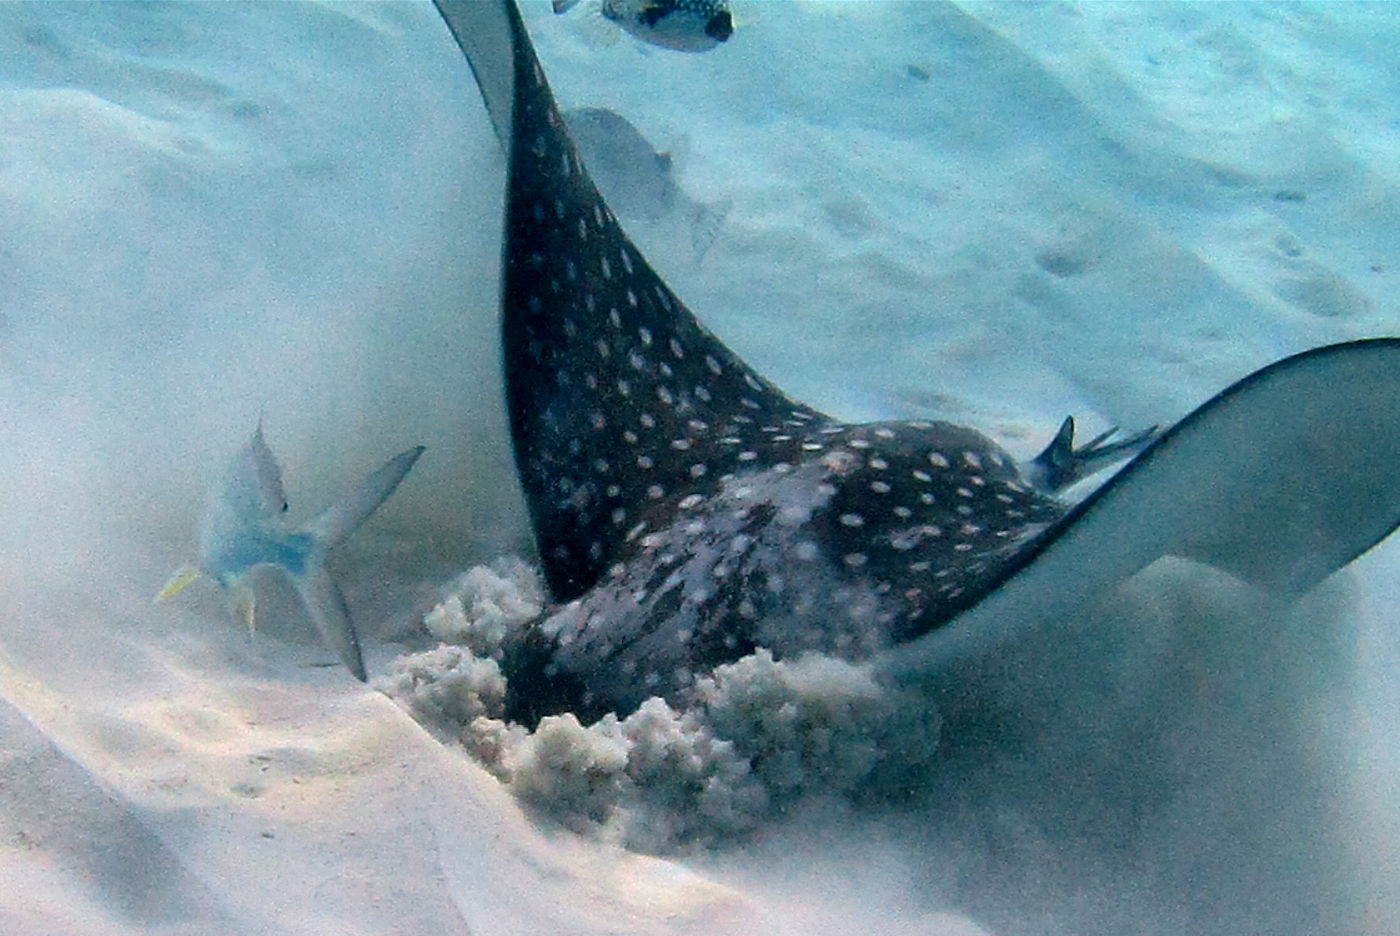 Eagle ray digging for dinner